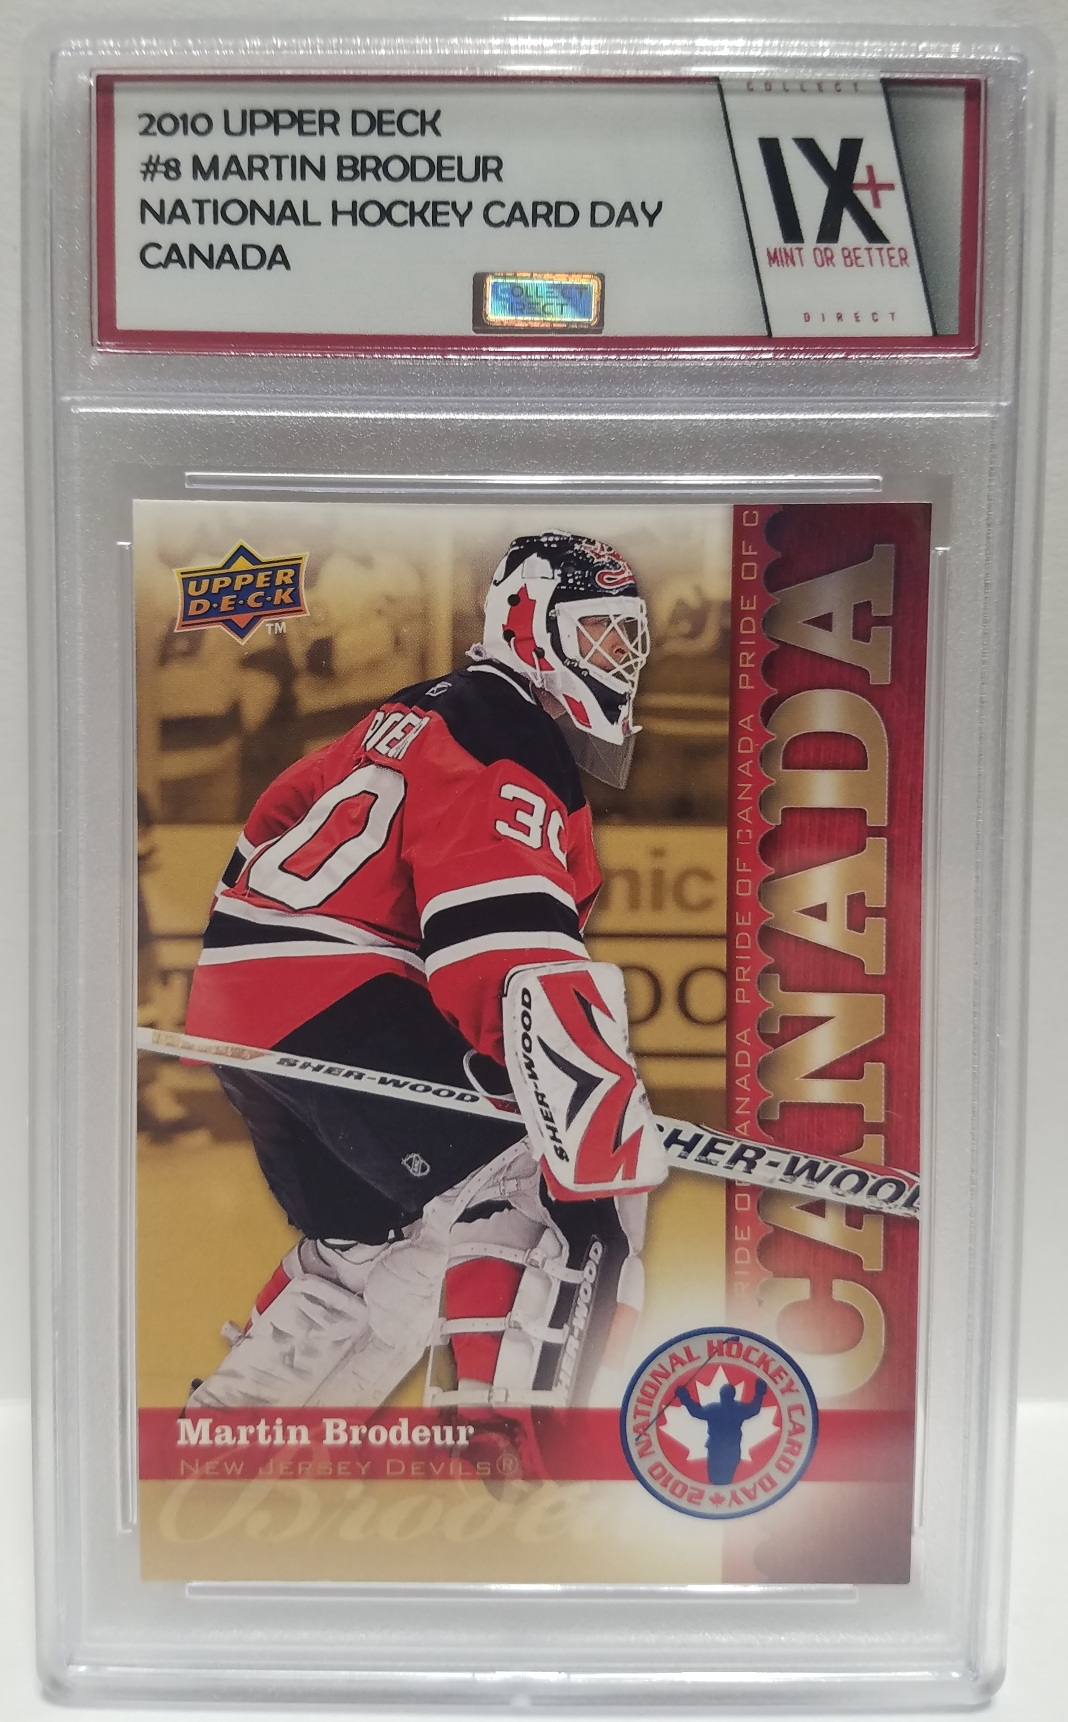 MARTIN BRODEUR 2010 UPPER DECK National Hockey Card Day Canada #8 Collect Direct Grade Mint or Better NEW JERSEY DEVILS